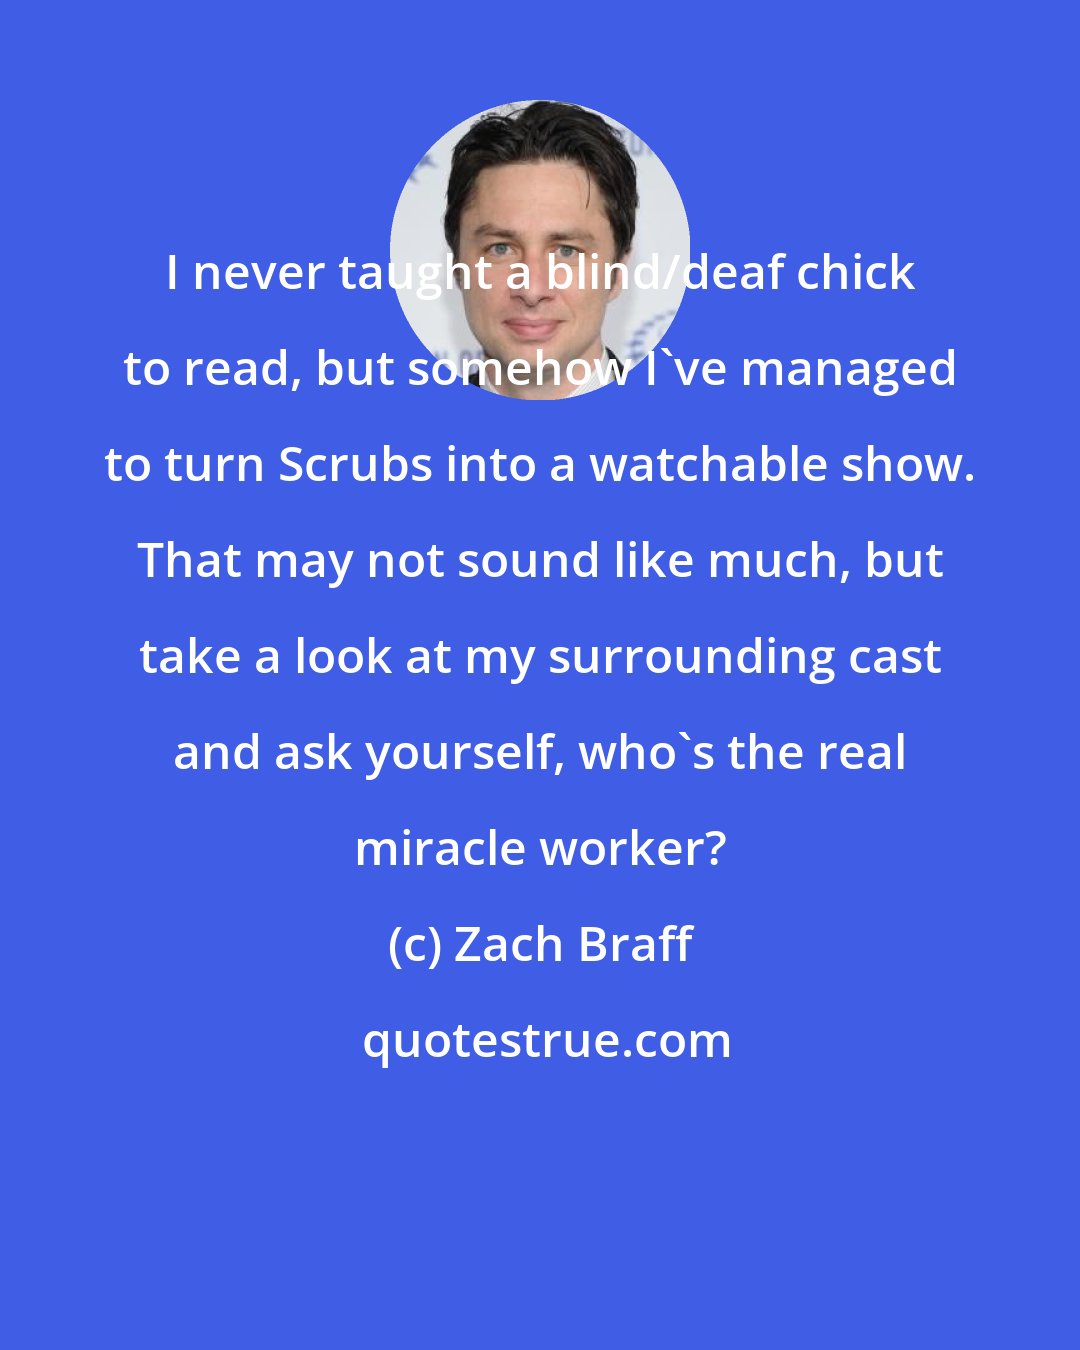 Zach Braff: I never taught a blind/deaf chick to read, but somehow I've managed to turn Scrubs into a watchable show. That may not sound like much, but take a look at my surrounding cast and ask yourself, who's the real miracle worker?